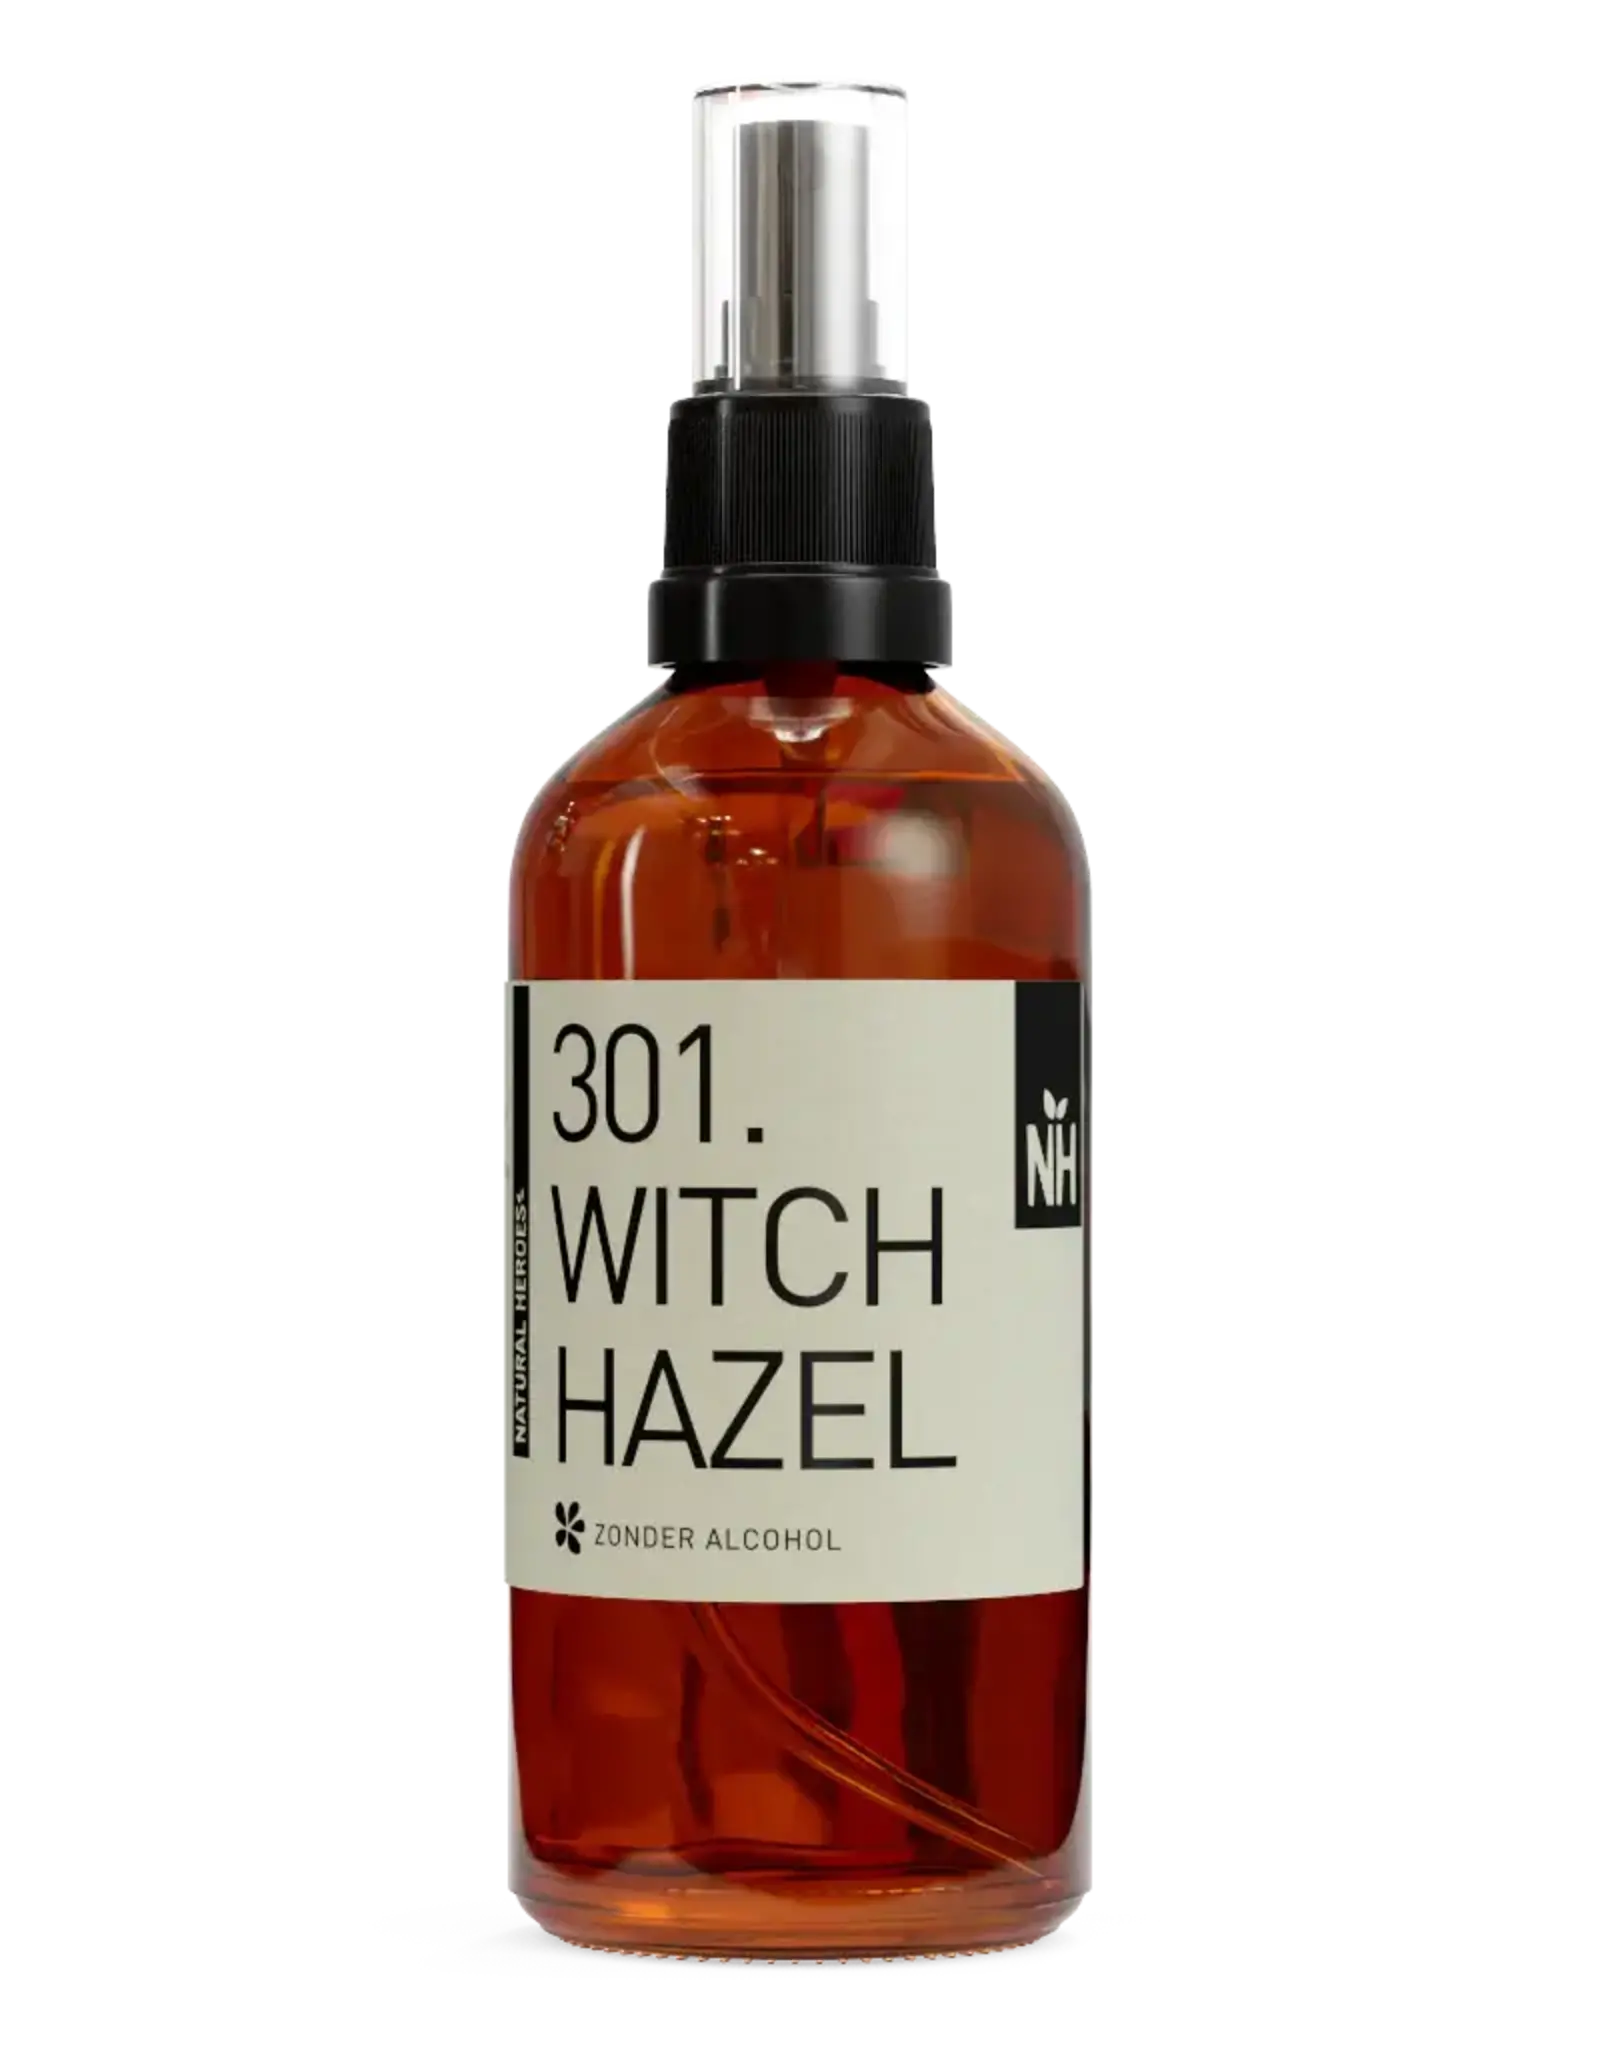 Natural Heroes Witch Hazel (Zonder Alcohol) 100ml